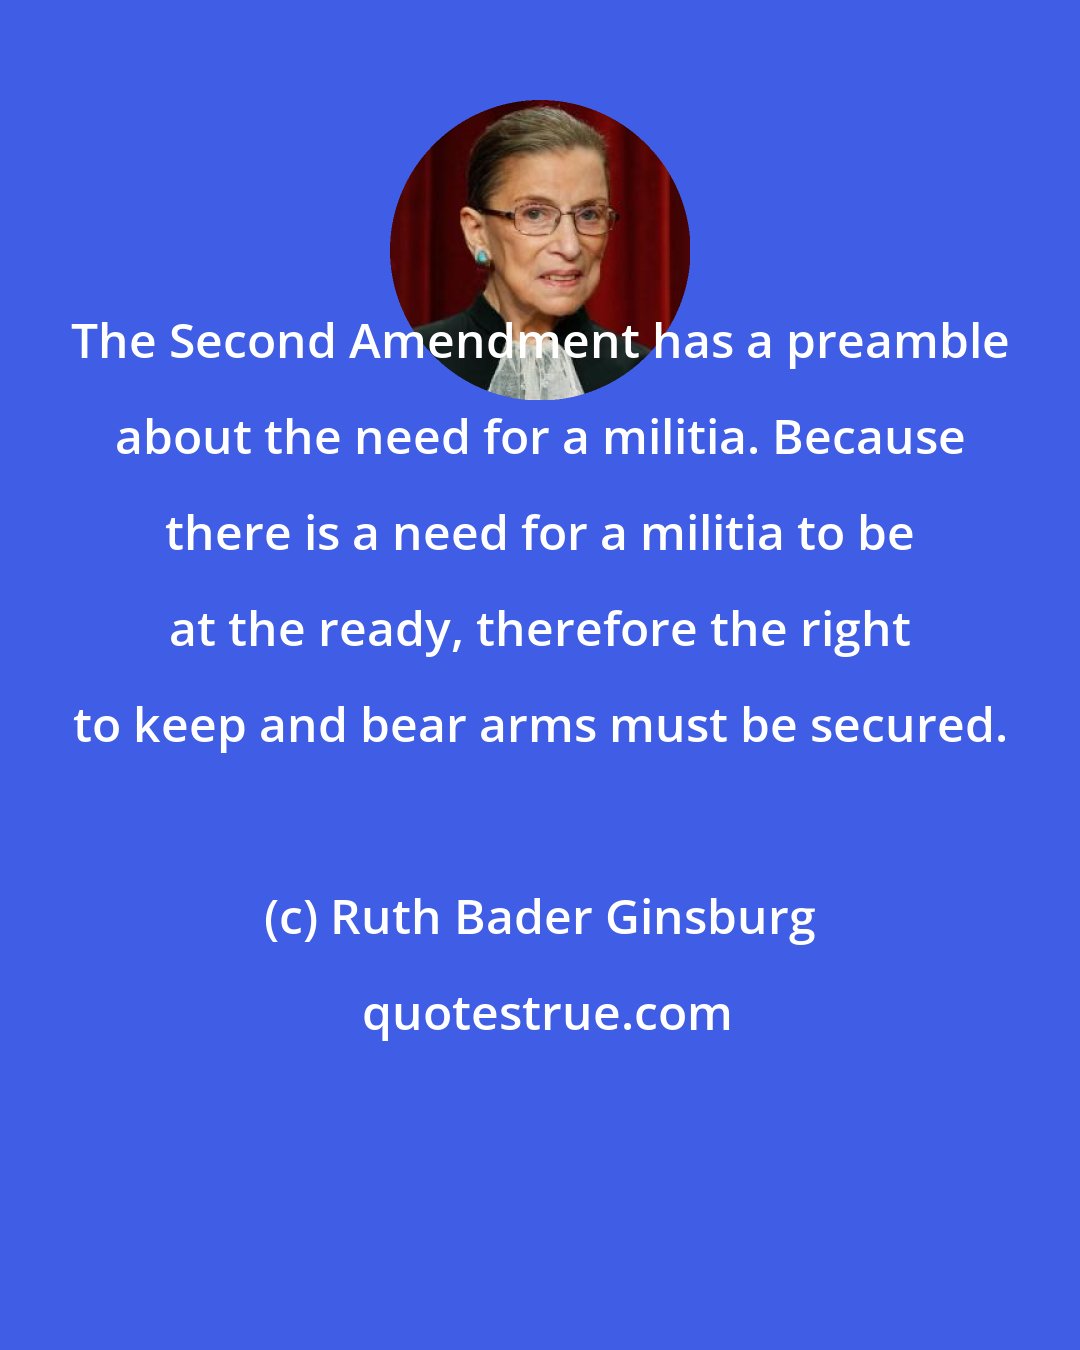 Ruth Bader Ginsburg: The Second Amendment has a preamble about the need for a militia. Because there is a need for a militia to be at the ready, therefore the right to keep and bear arms must be secured.